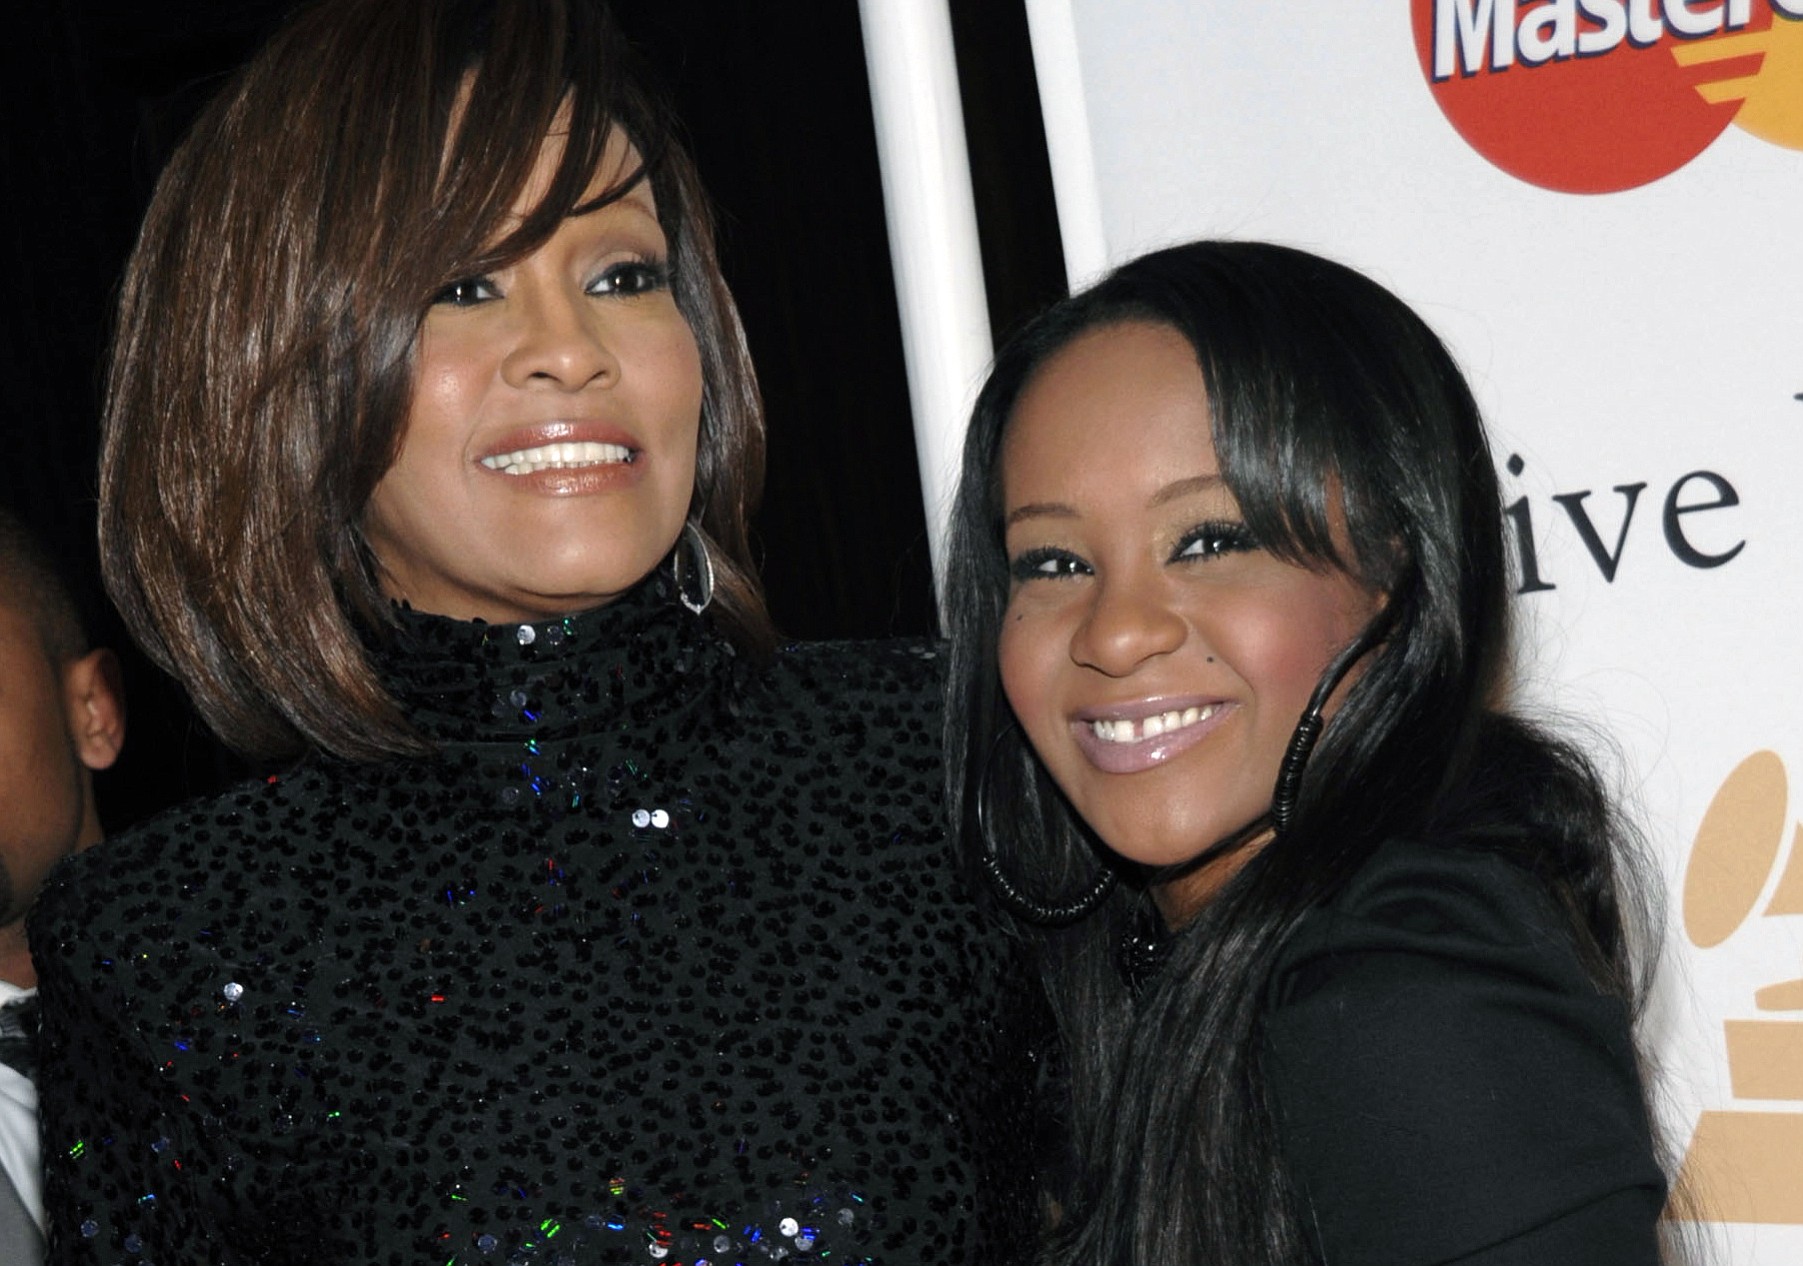 Singer Whitney Houston, left, and daughter Bobbi Kristina Brown arrive Feb. 12, 2011 at an event in Beverly Hills, Calif. The daughter of late singer and entertainer Whitney Houston was found Saturday unresponsive in a bathtub by her husband and a friend and taken to an Atlanta-area hospital.